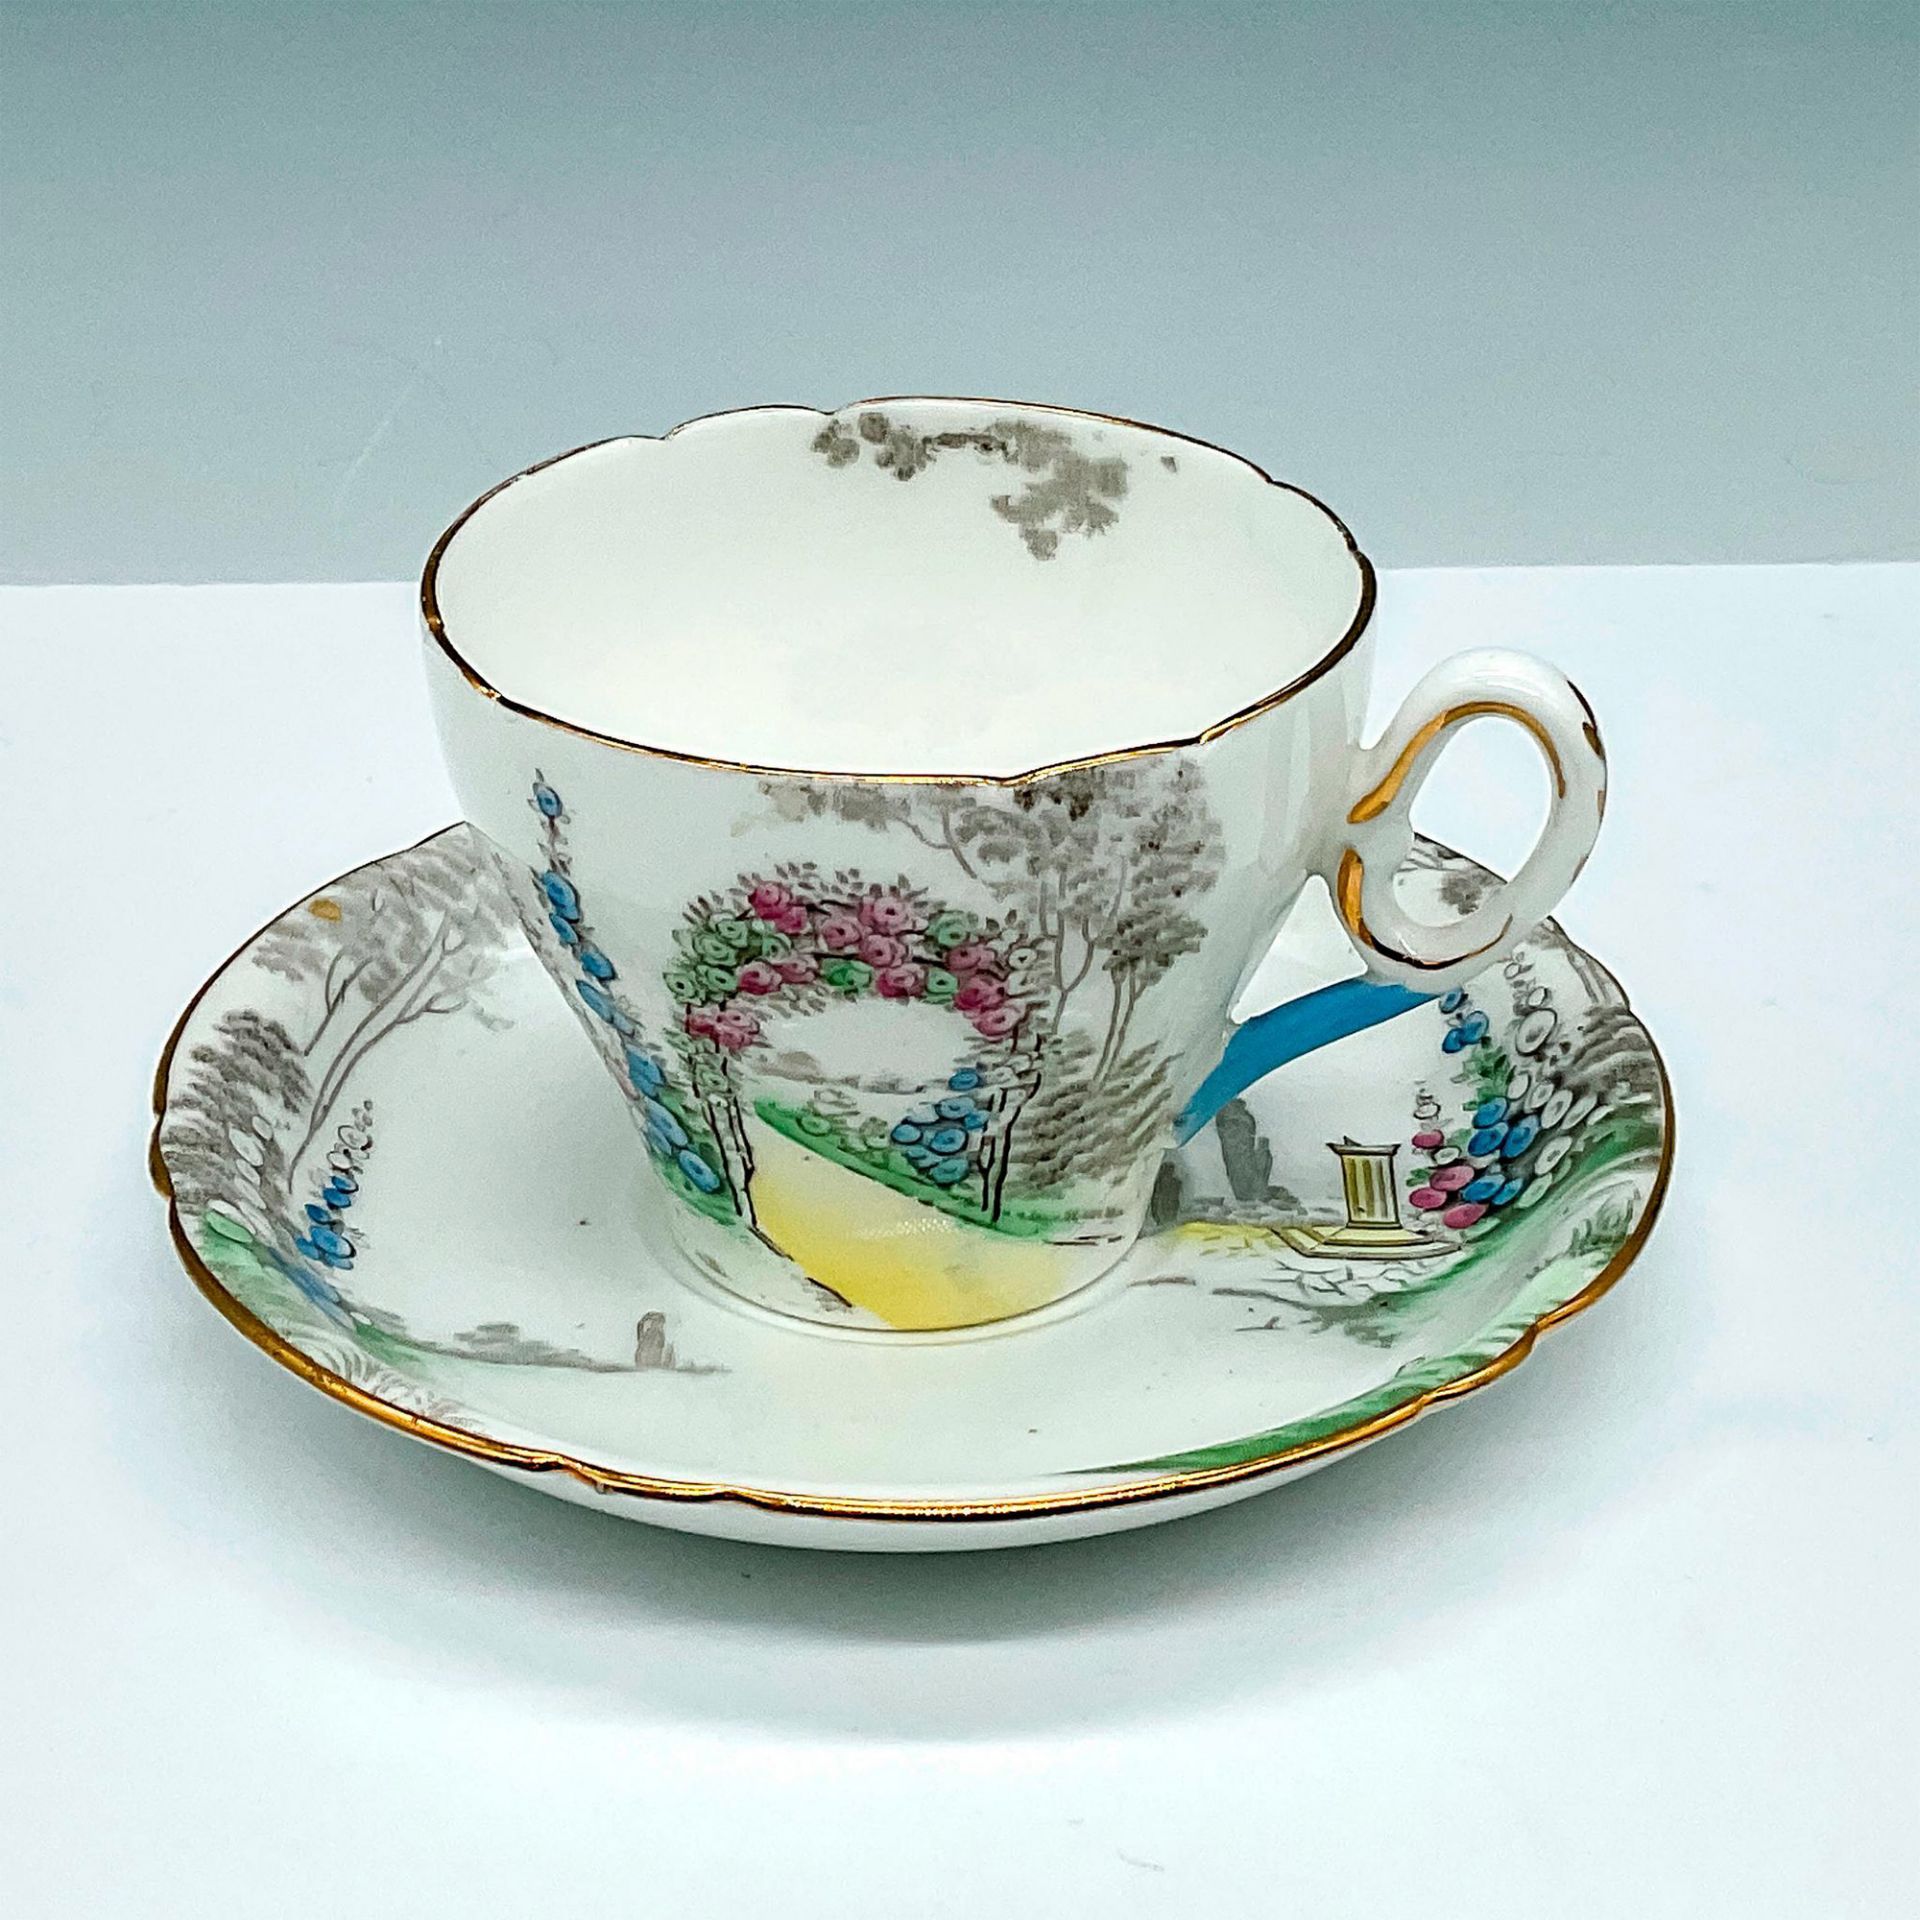 Shelley China Teacup and Saucer Set, Archway of Roses